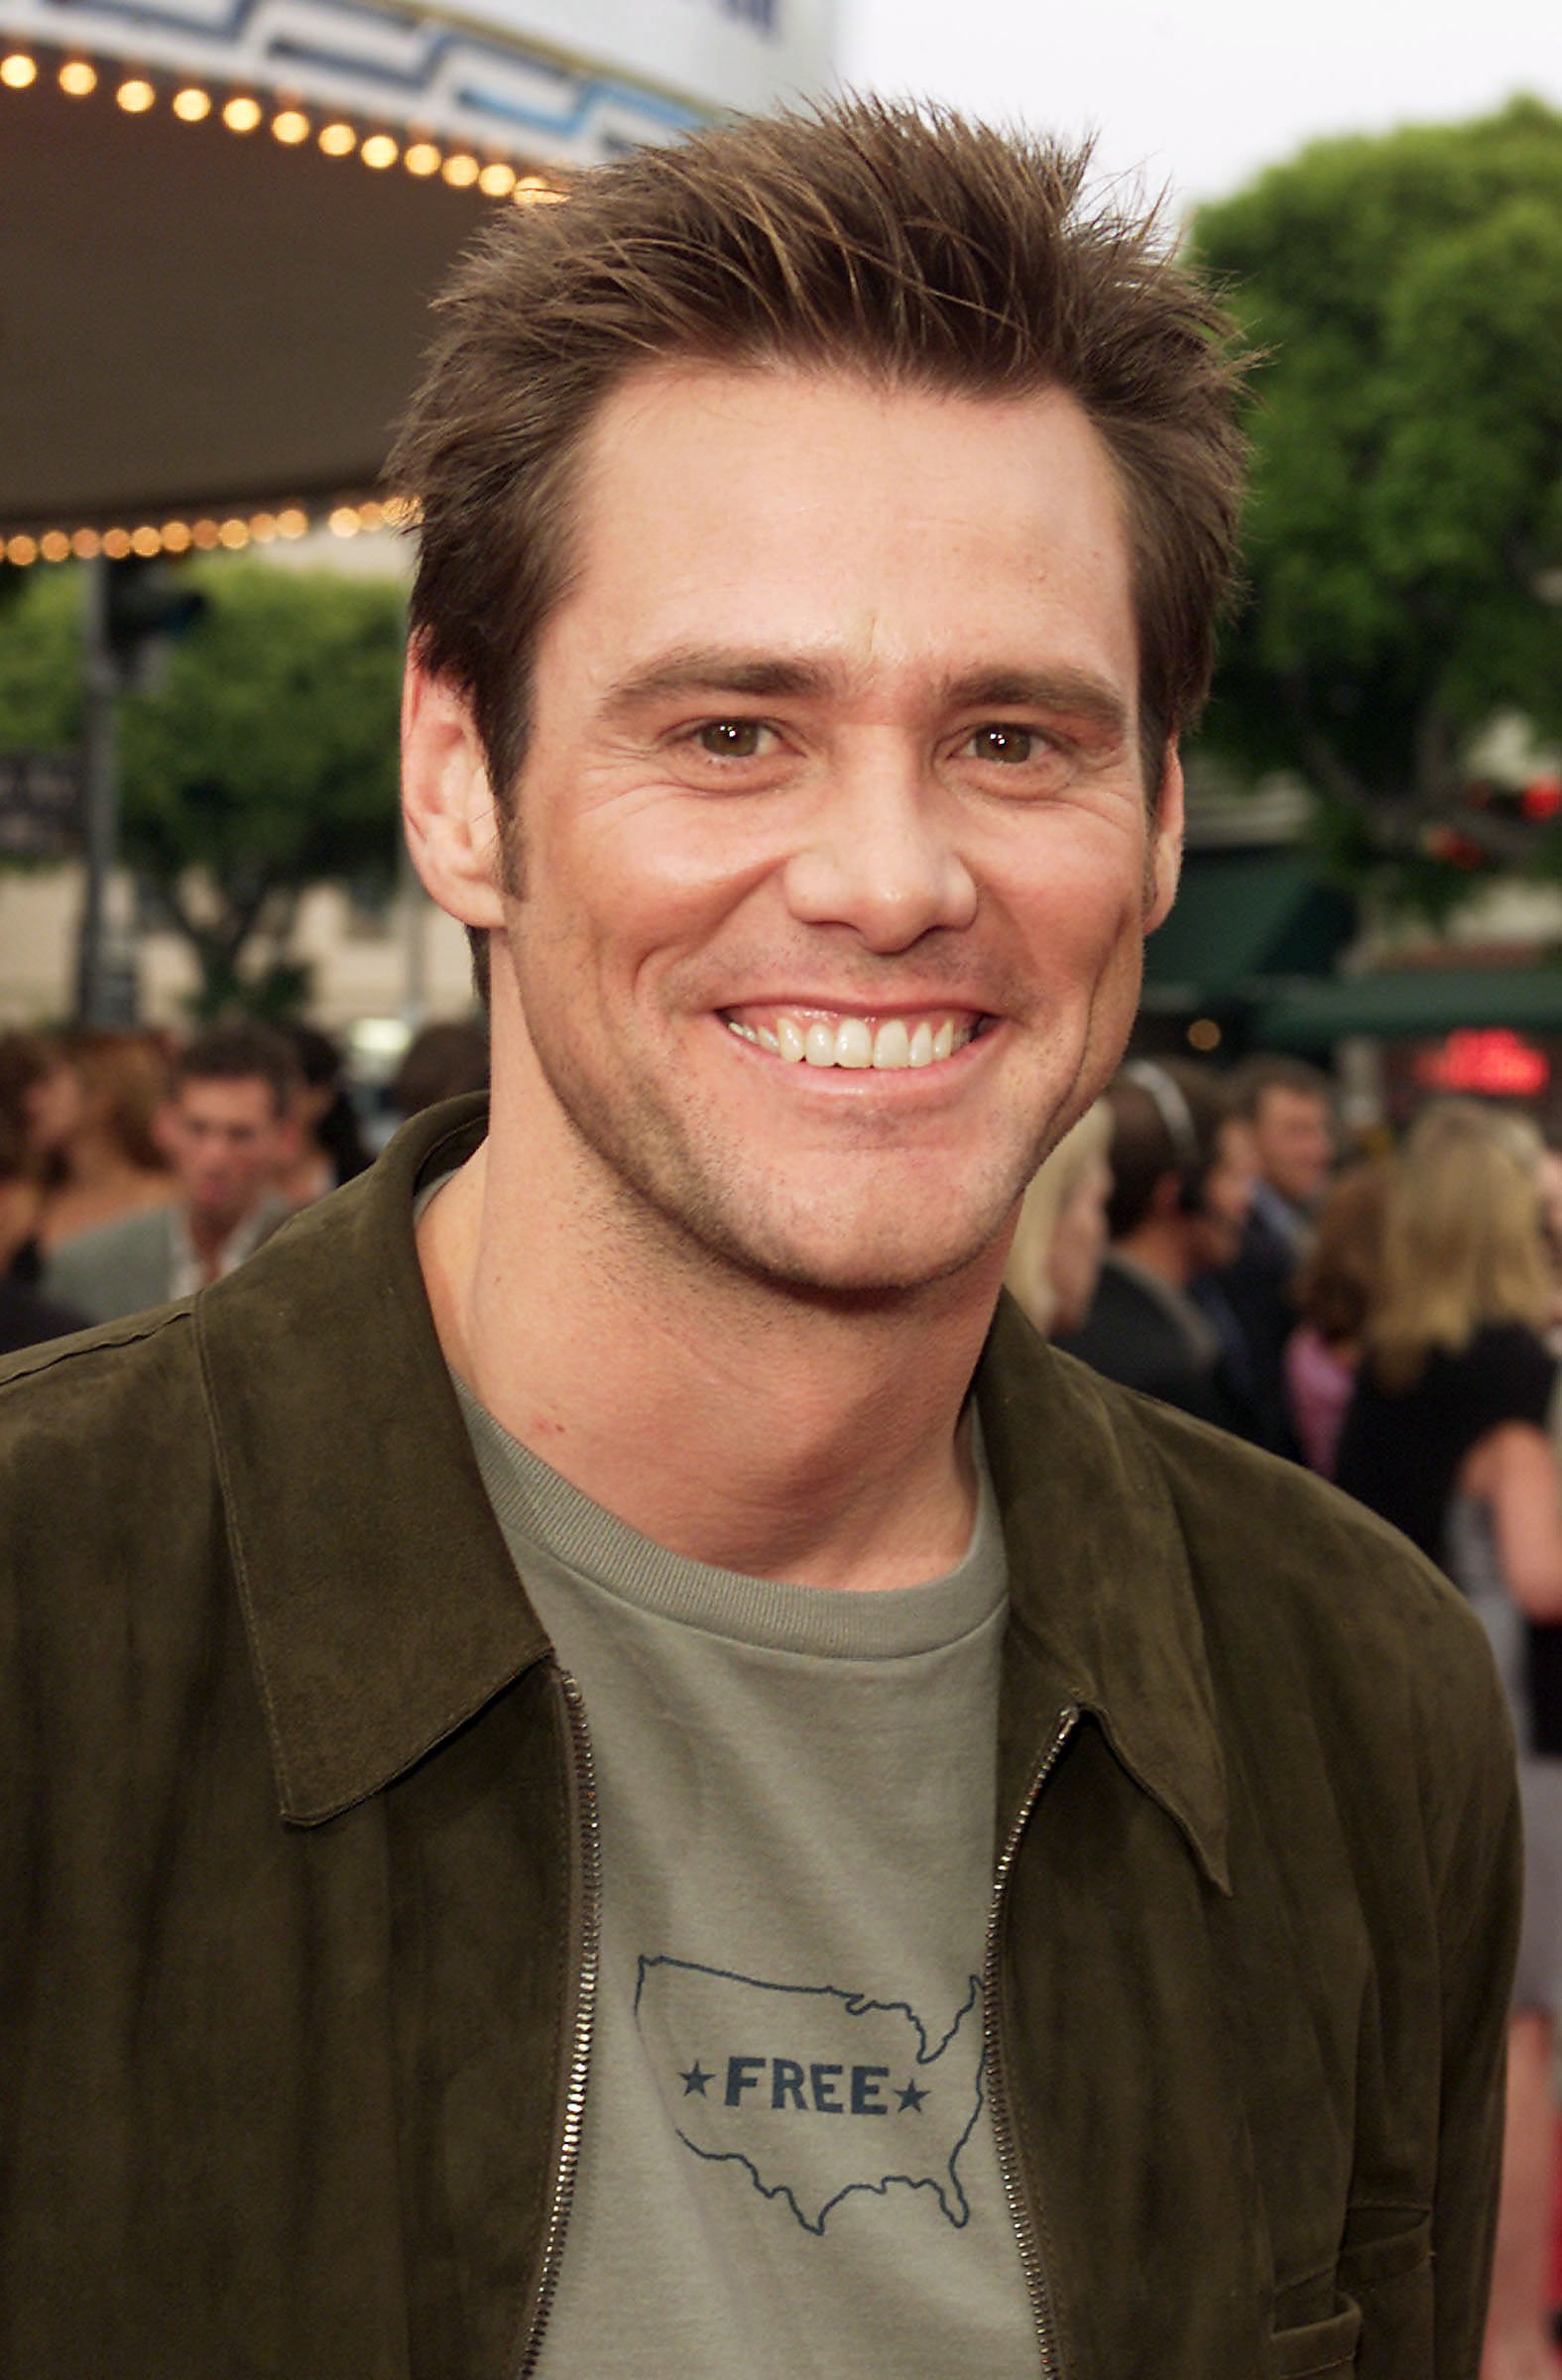 Jim Carrey at the premiere of 'Me, Myself & Irene' at the Village Theater in Westwood, Ca. onJune 15, 2000. | Source: Getty Images.